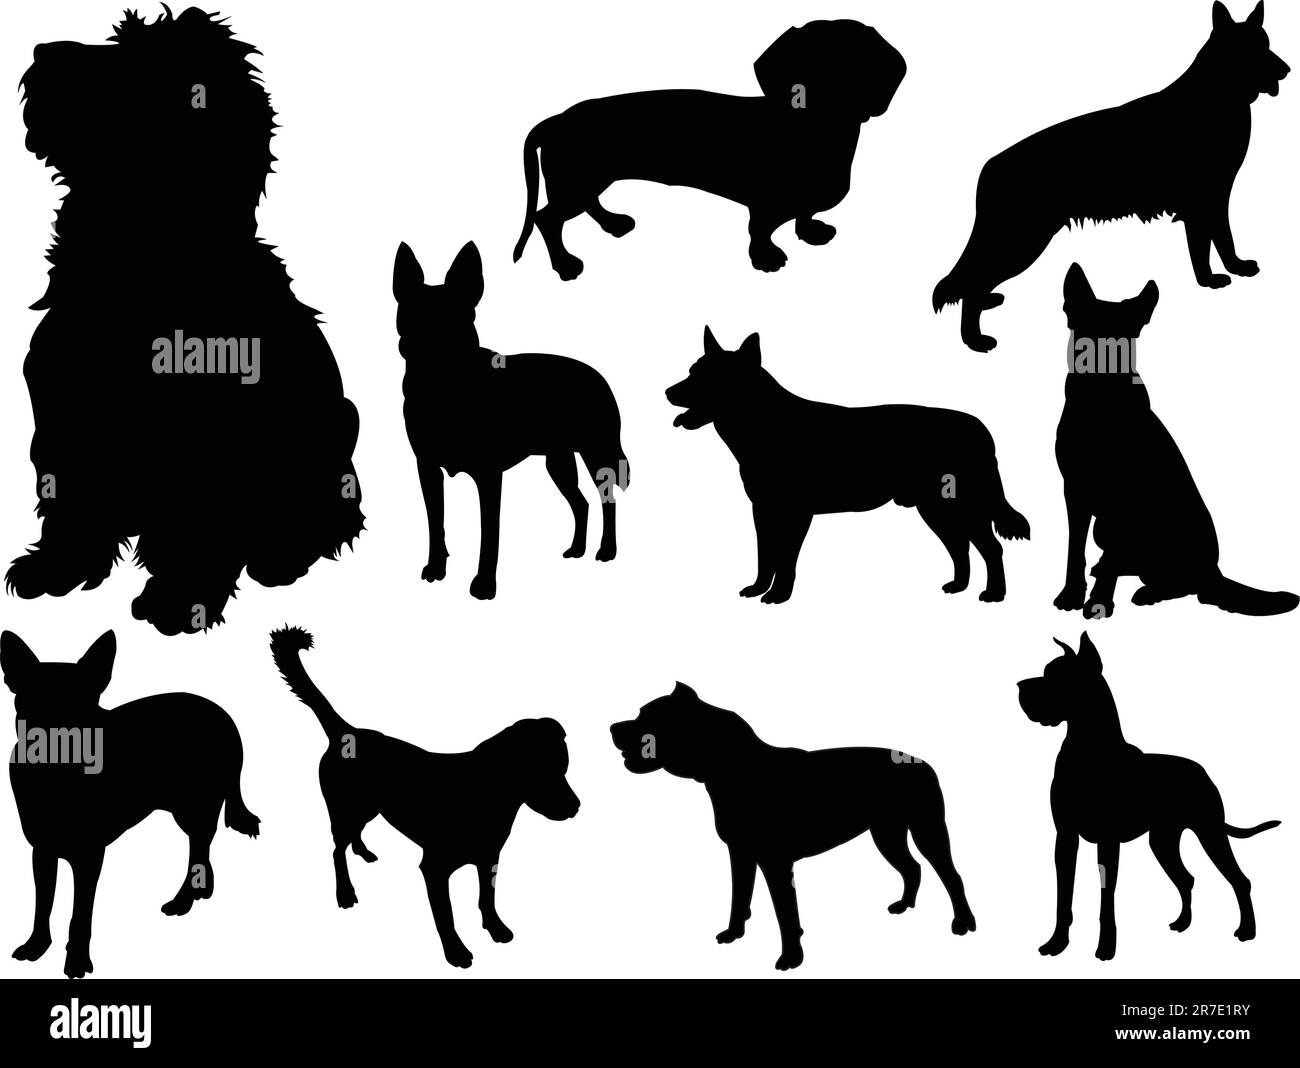 illustration of dog collection - vector Stock Vector